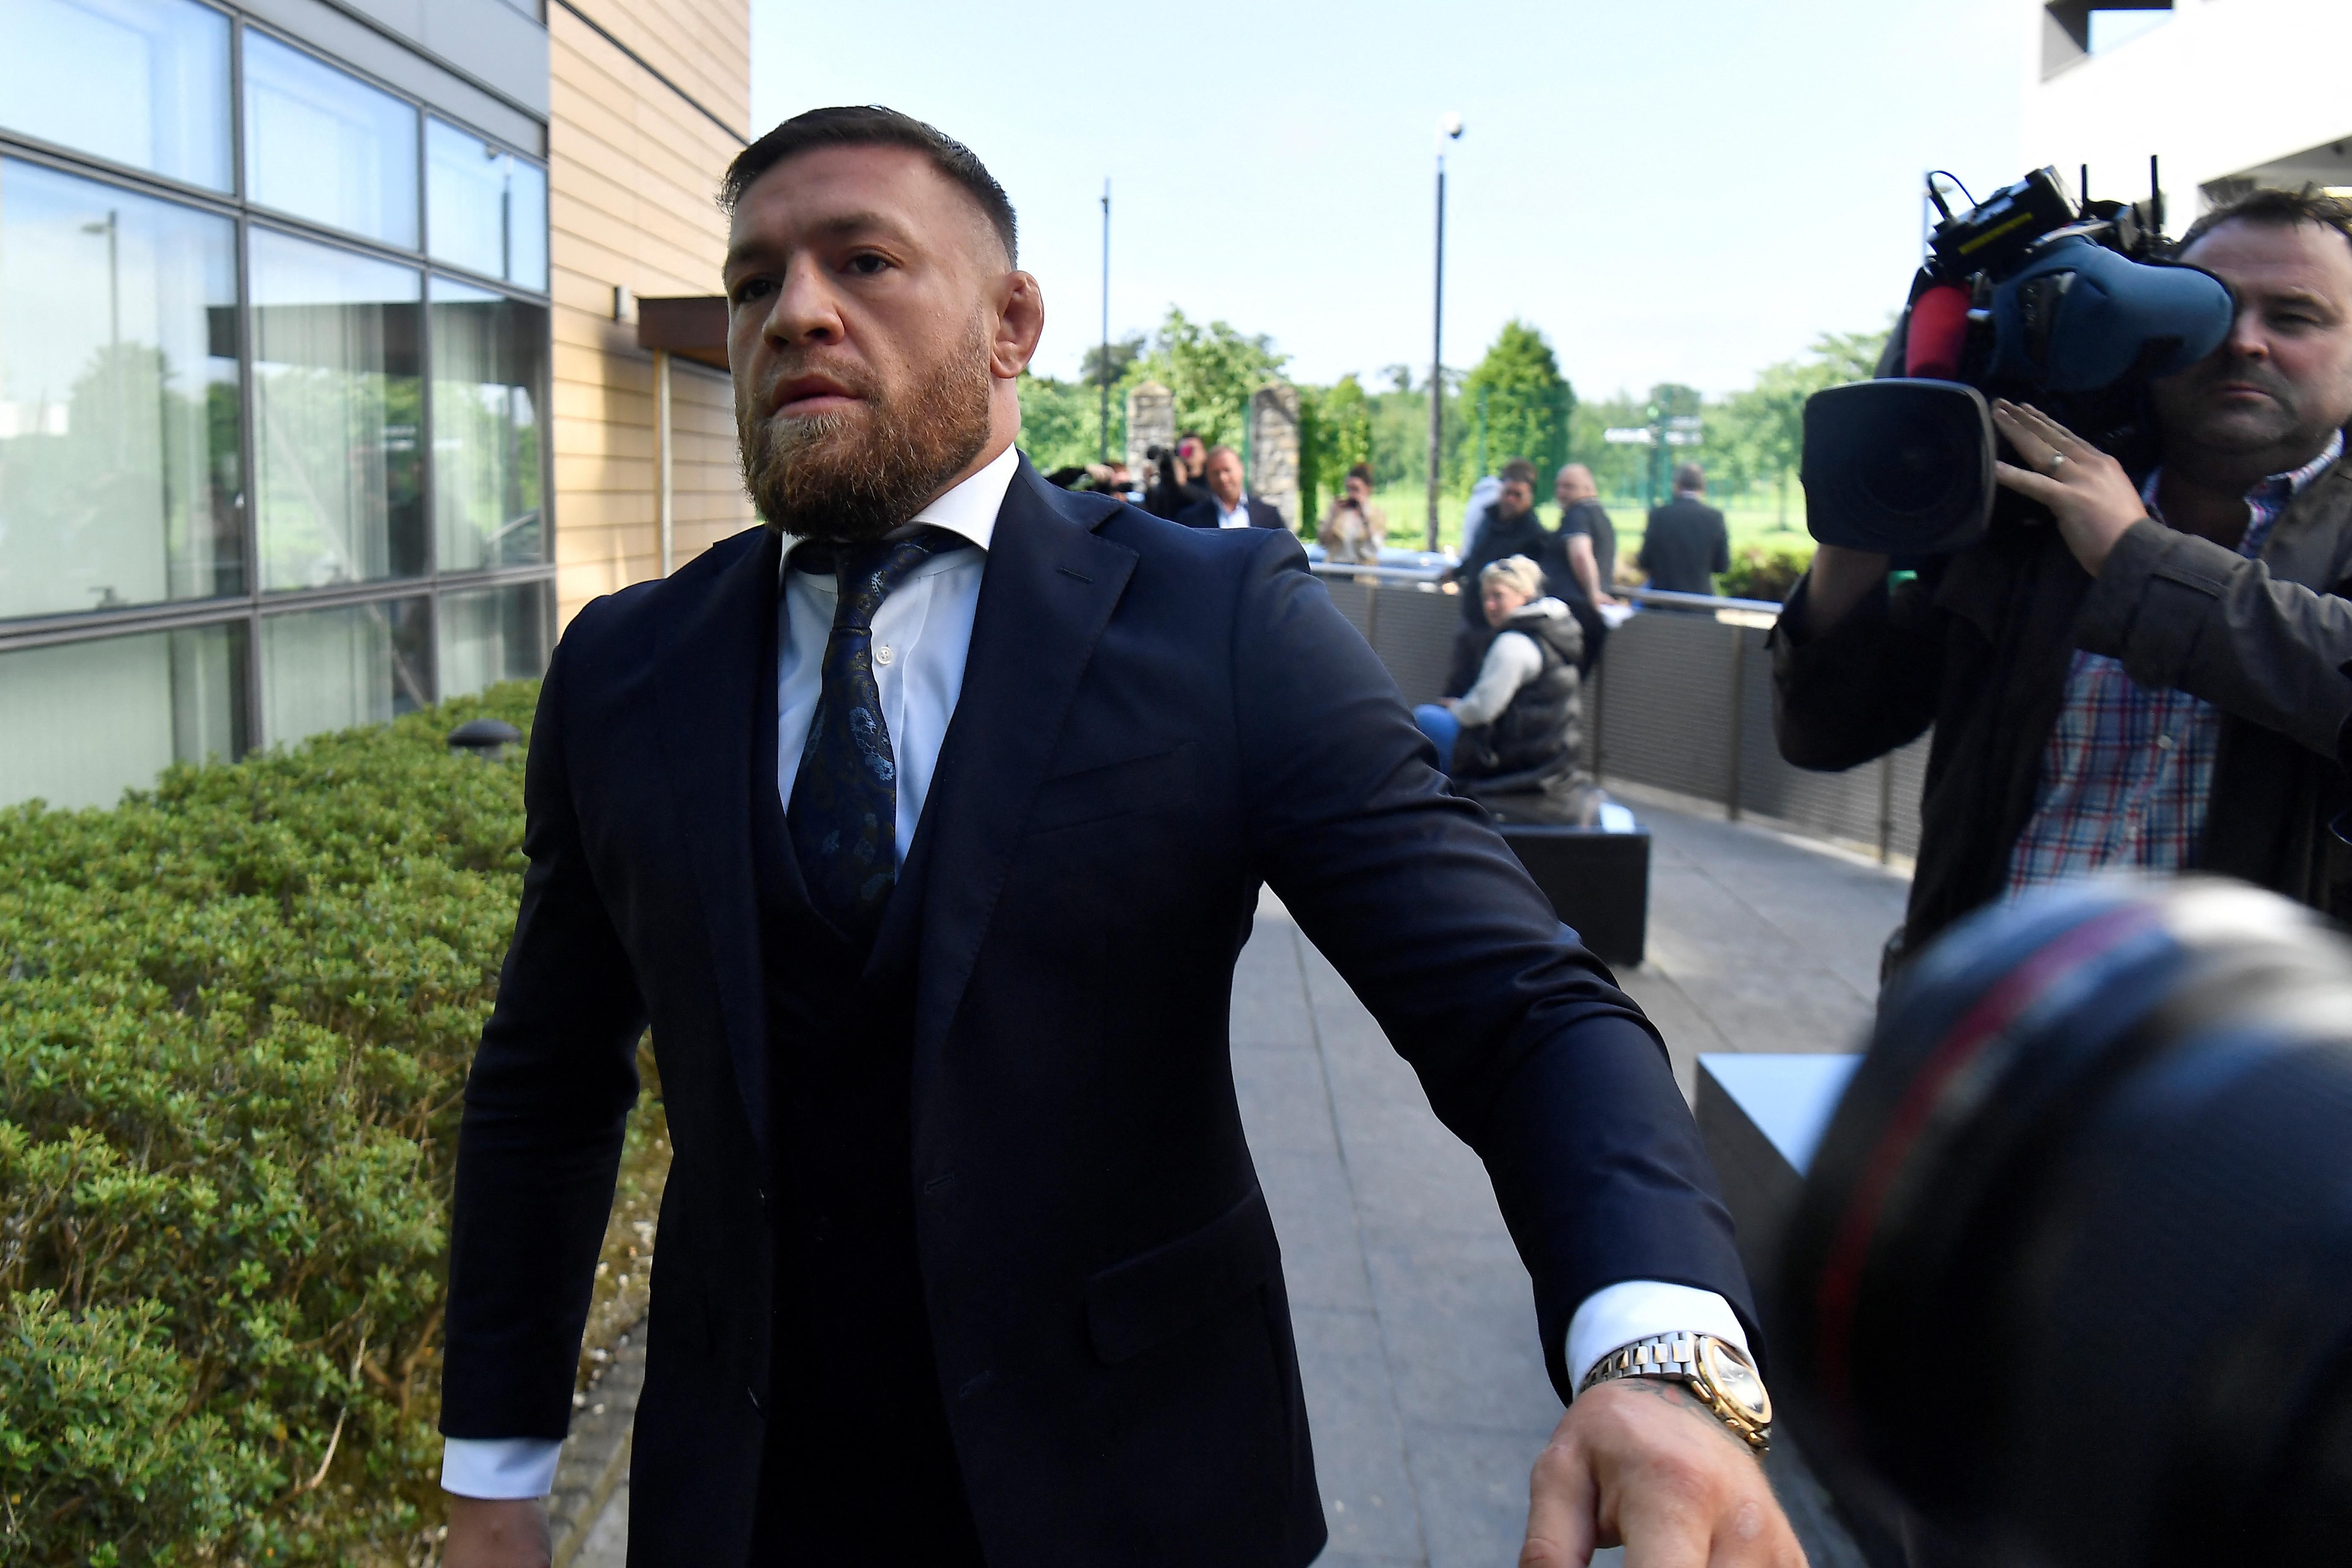 Conor McGregor was denounced for an alleged assault on a woman in July 2022 (Reuters)